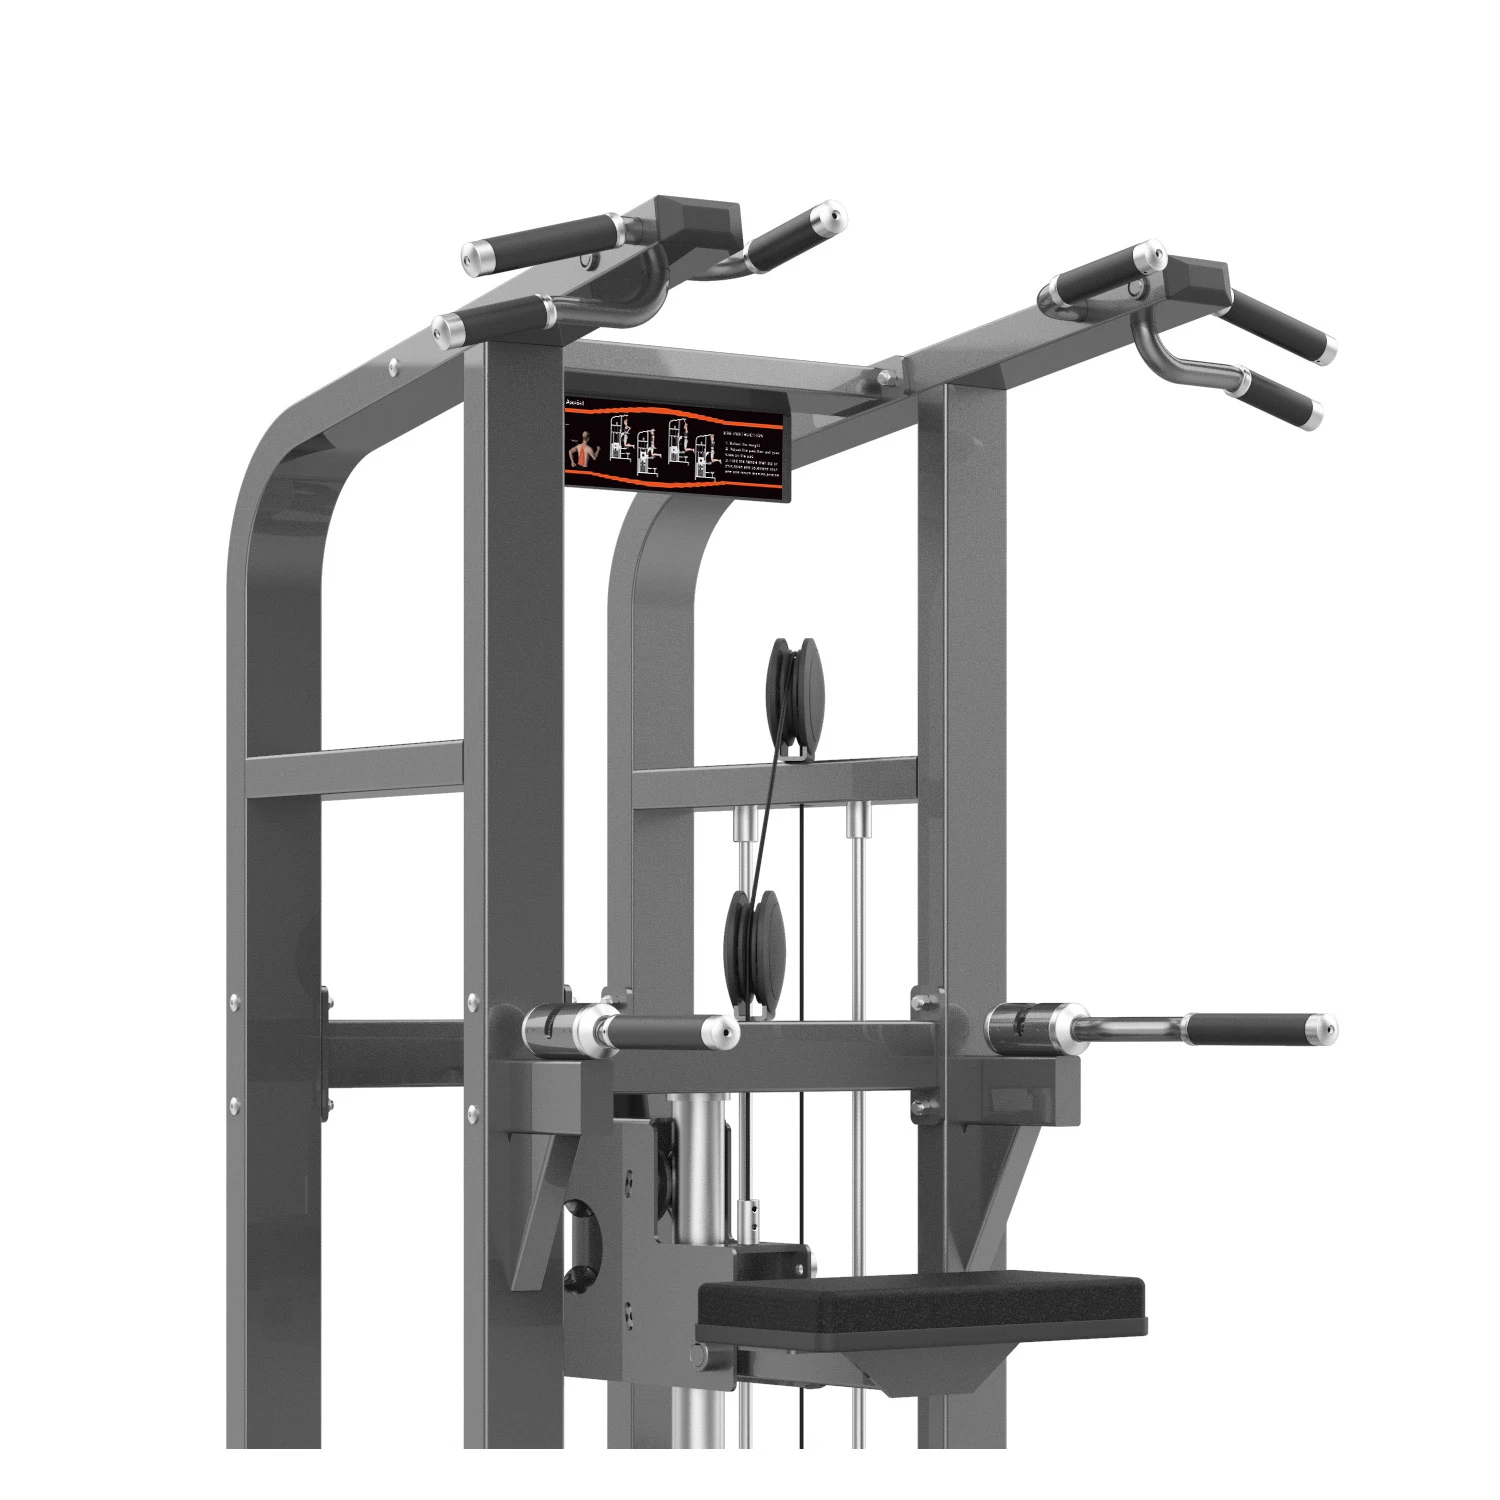 Realleader Best Gym Exercise Equipment Fitness Bodybuilding of Chin/DIP Assist (M3-1020)